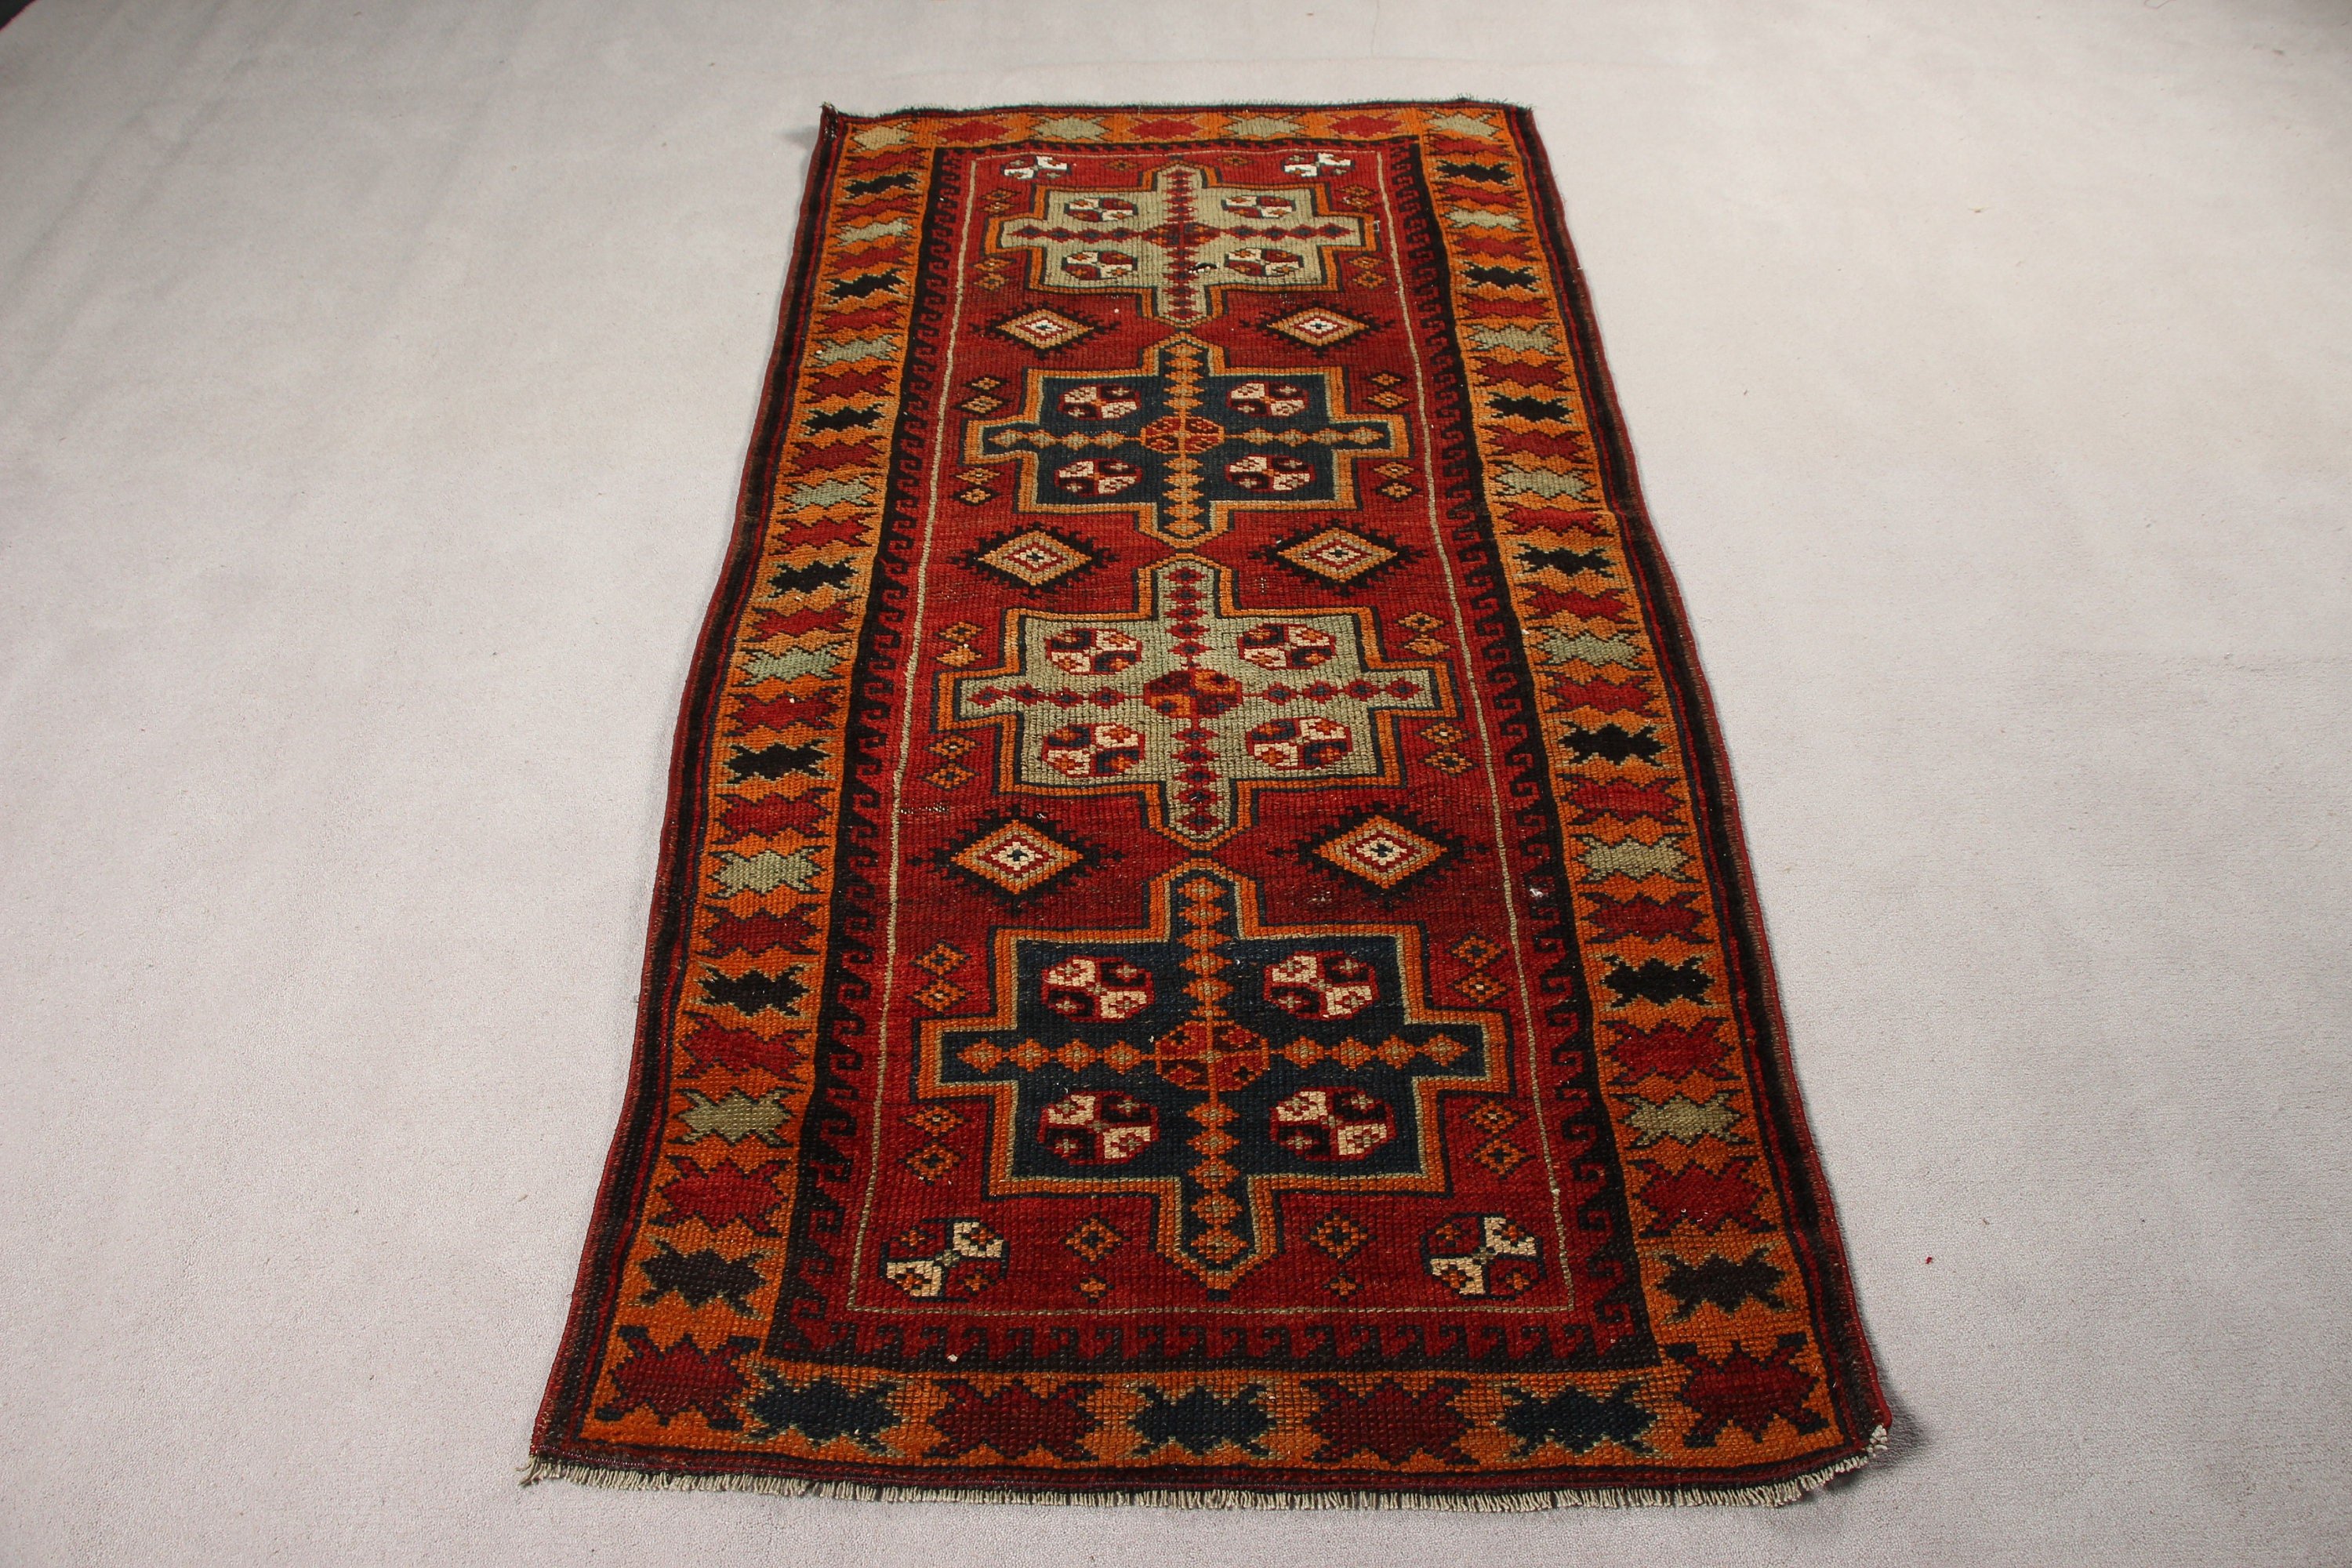 Vintage Rug, Anatolian Rug, Rugs for Kitchen, Entry Rugs, Kitchen Rug, Turkish Rugs, Bedroom Rug, Red Cool Rug, 3.1x6.8 ft Accent Rug